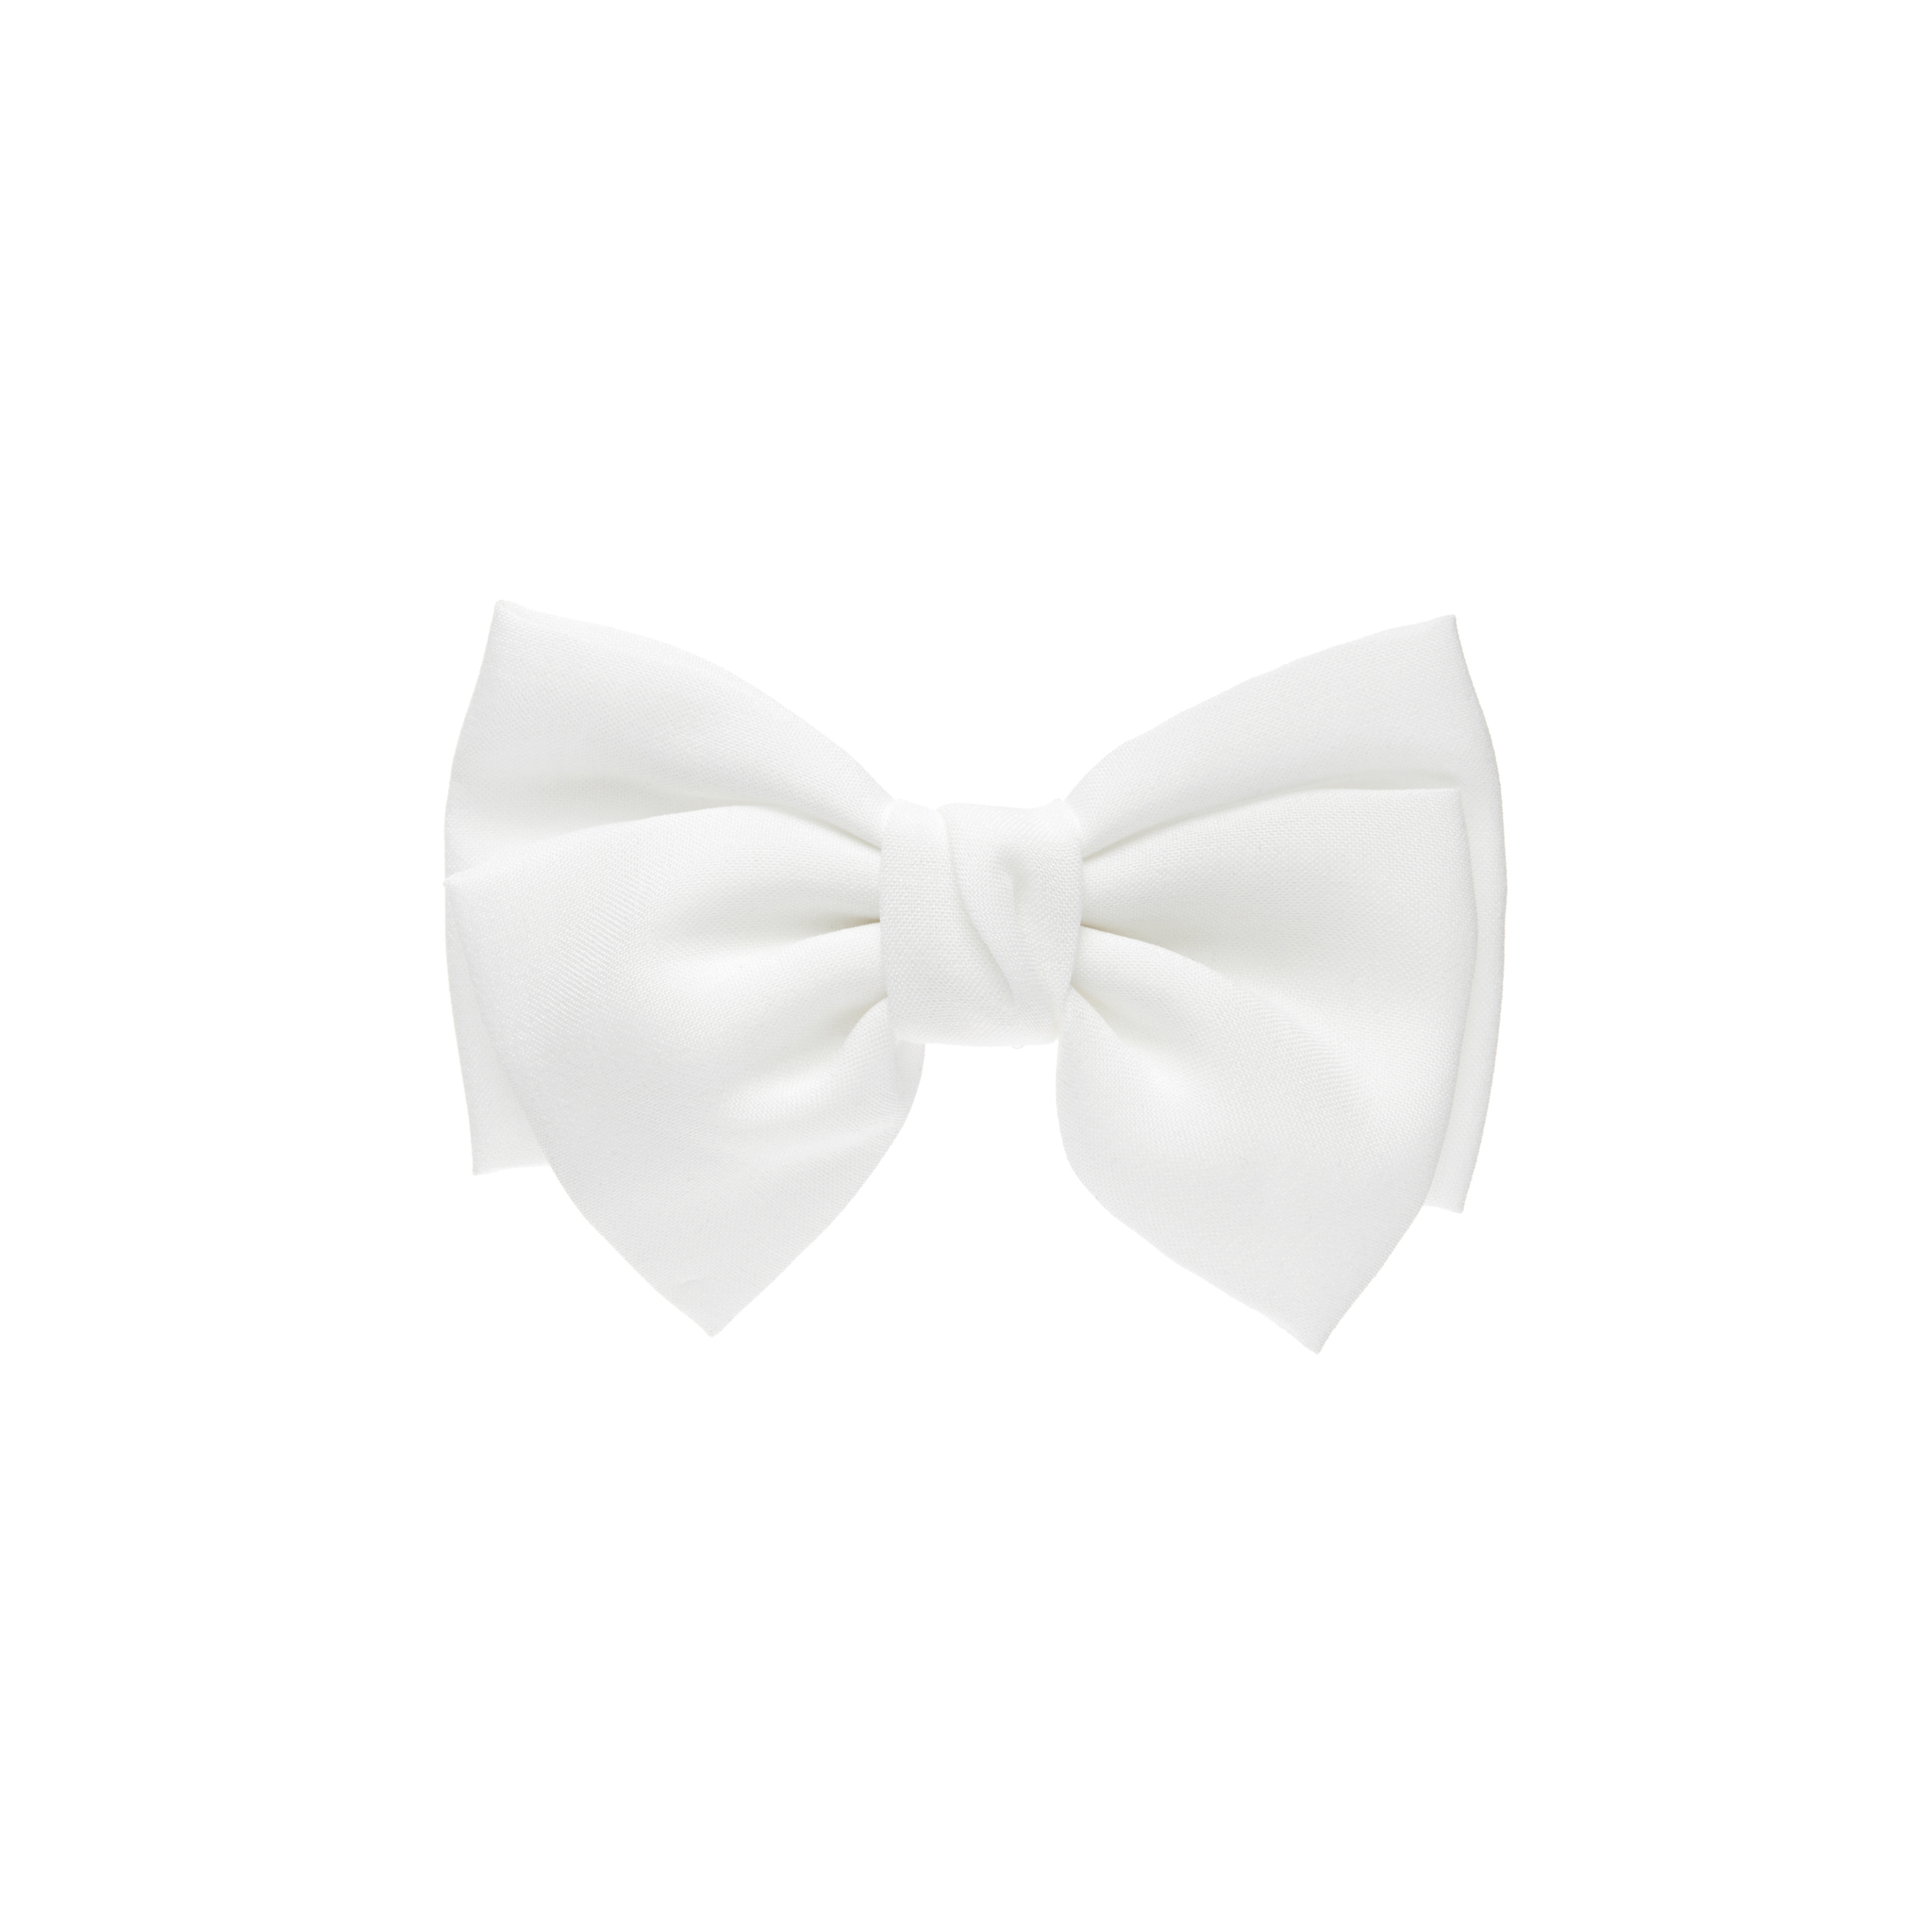 HOLLY JUNE Заколка Bow Hair Clip – White 1pc satin bow with clip women girls elegant bow tie hairpins vintage barrette bow hair clip prom headwear hair accessories party